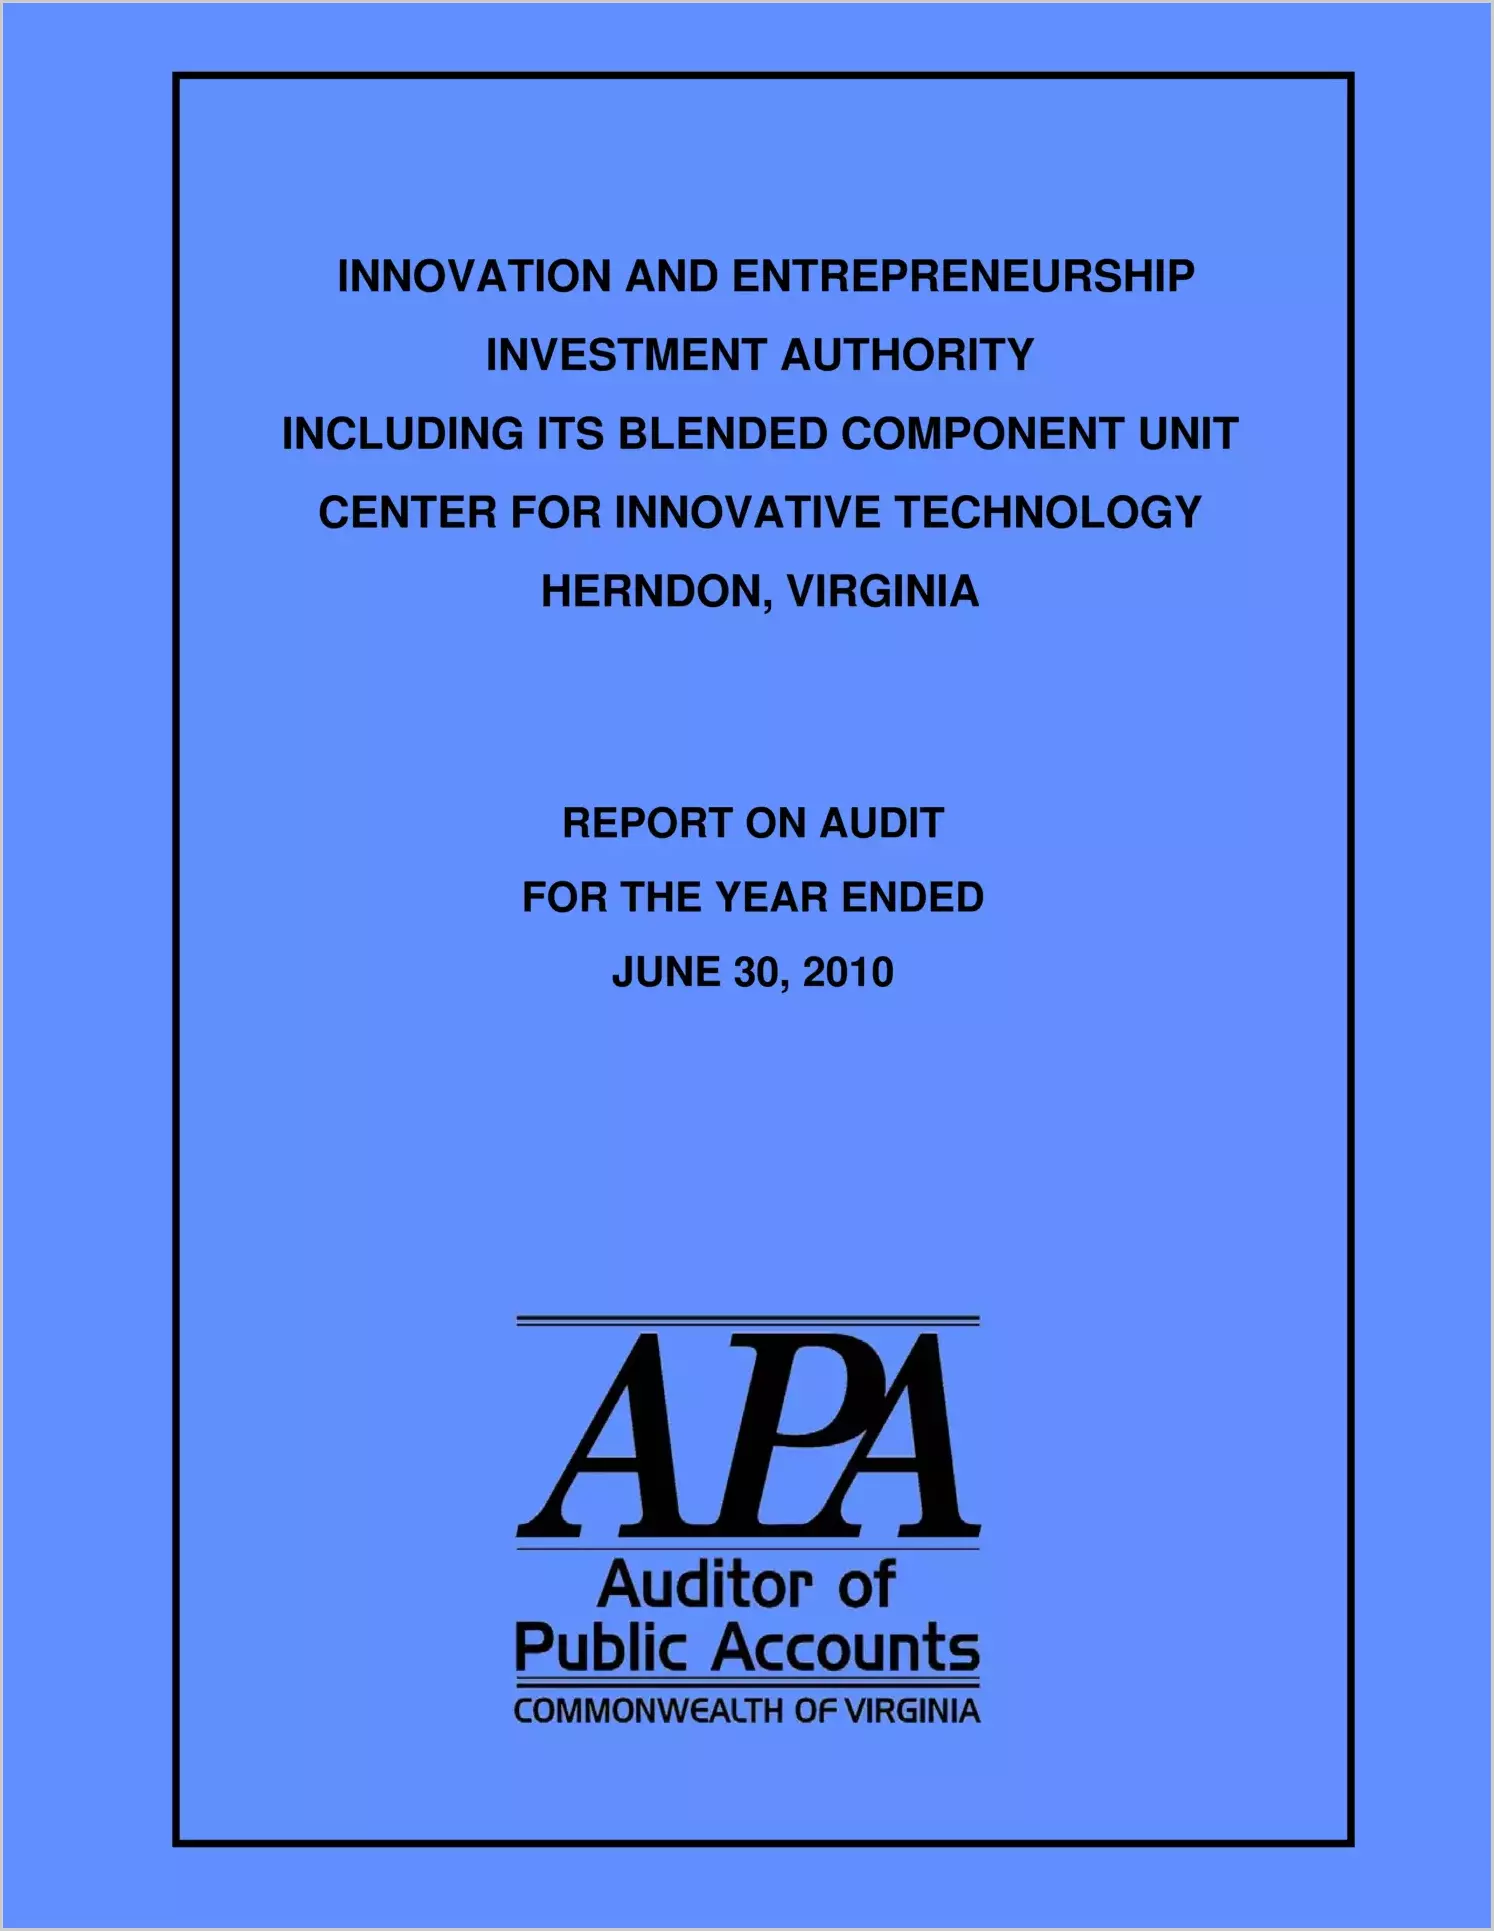 Innovation and Entrepreneurship Investment Authority Including Its Blended Component Unit Center for Innovative Technology for the year ended June 30, 2010